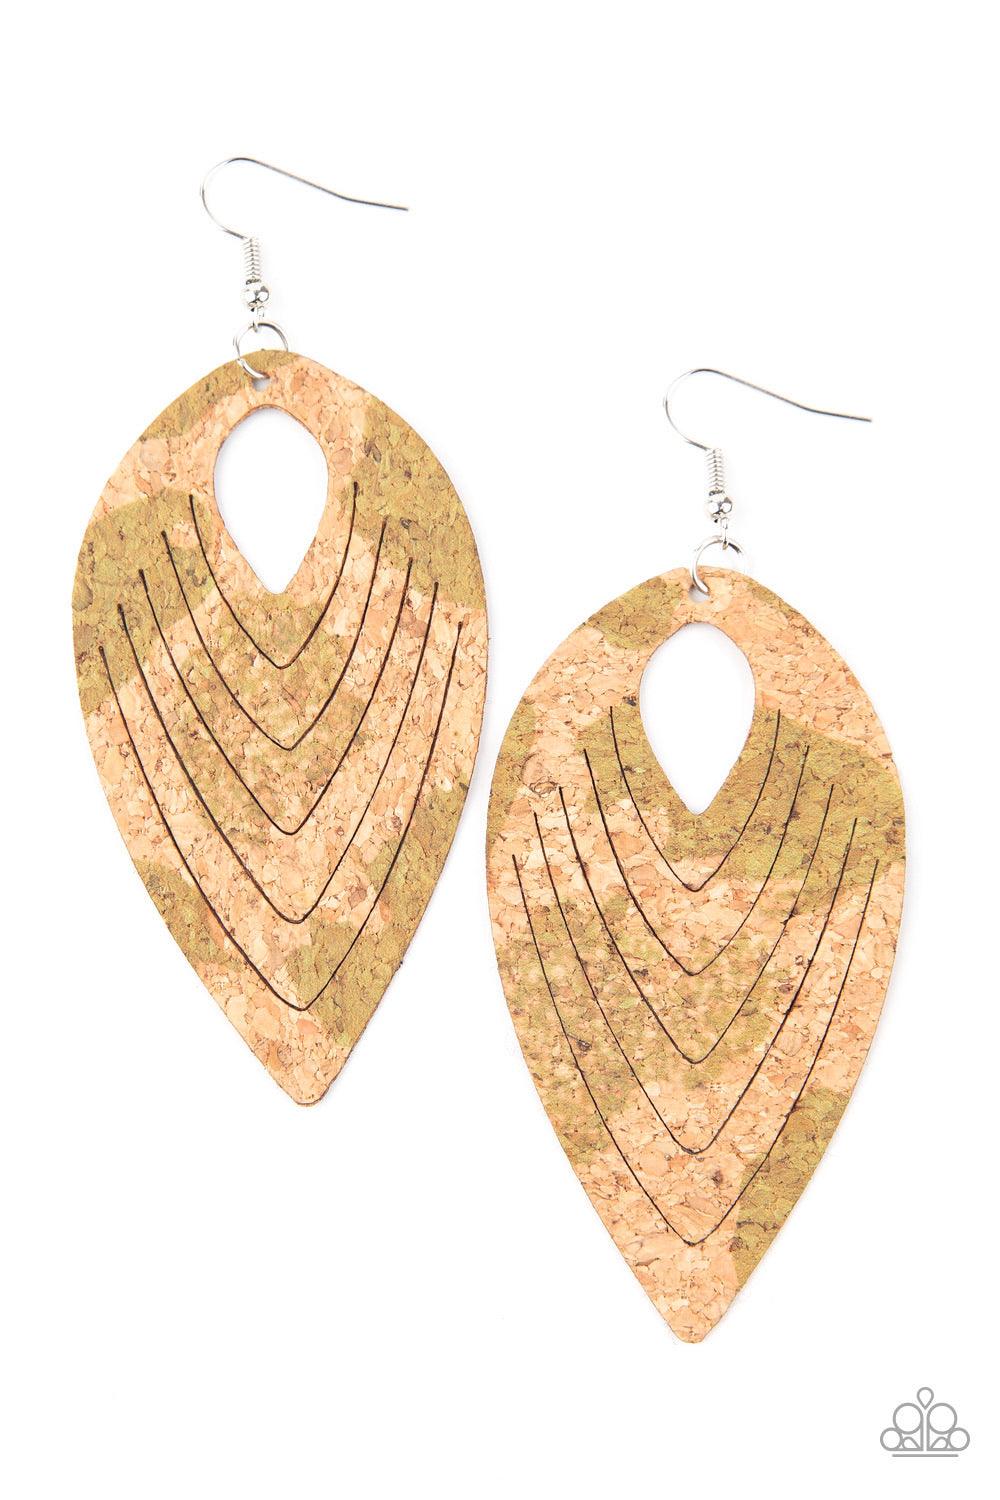 Paparazzi Accessories Cork Cabana - Green Spotted in rustic Military Olive accents, a flat cork teardrop is spliced into a rippling frame for an earthy fashion. Earring attaches to a standard fishhook fitting. Sold as one pair of earrings. Jewelry